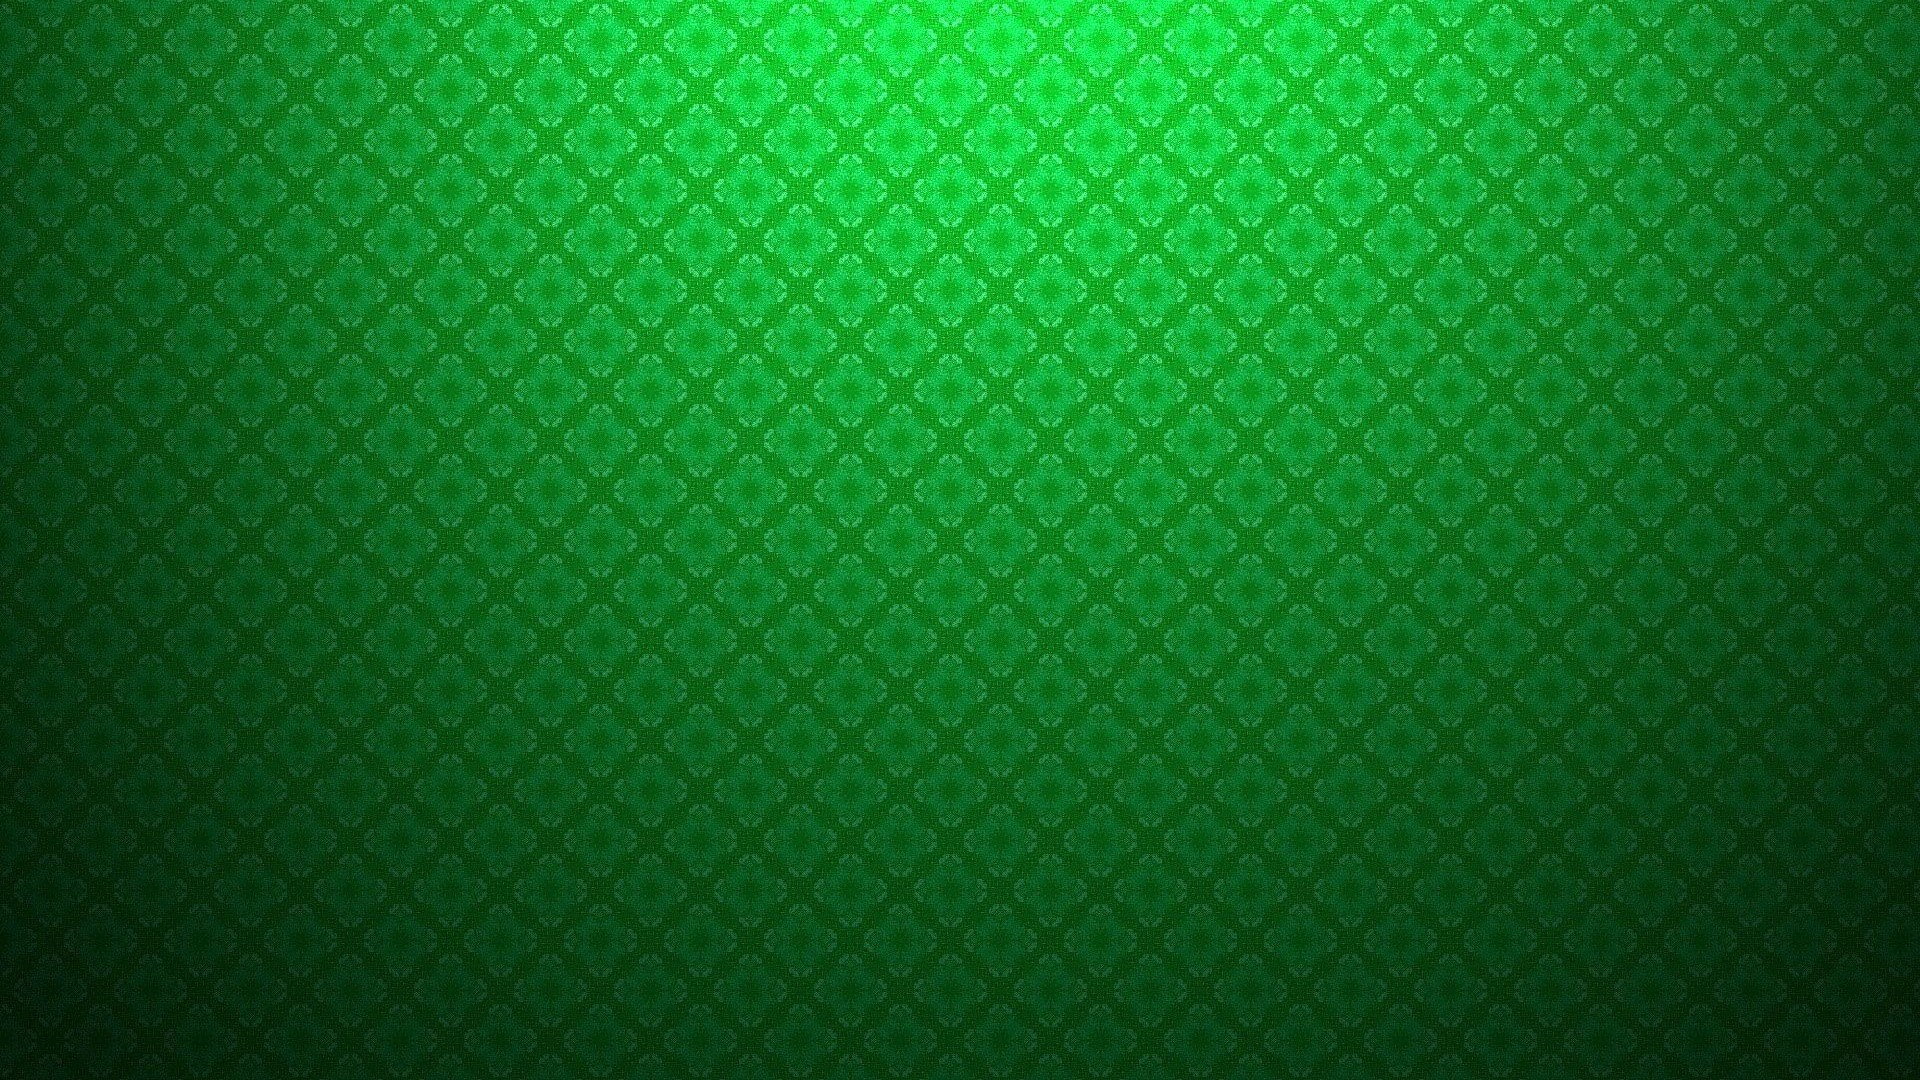 Dark Green Desktop Backgrounds With Resolution 1920X1080 pixel. You can make this wallpaper for your Desktop Computer Backgrounds, Mac Wallpapers, Android Lock screen or iPhone Screensavers